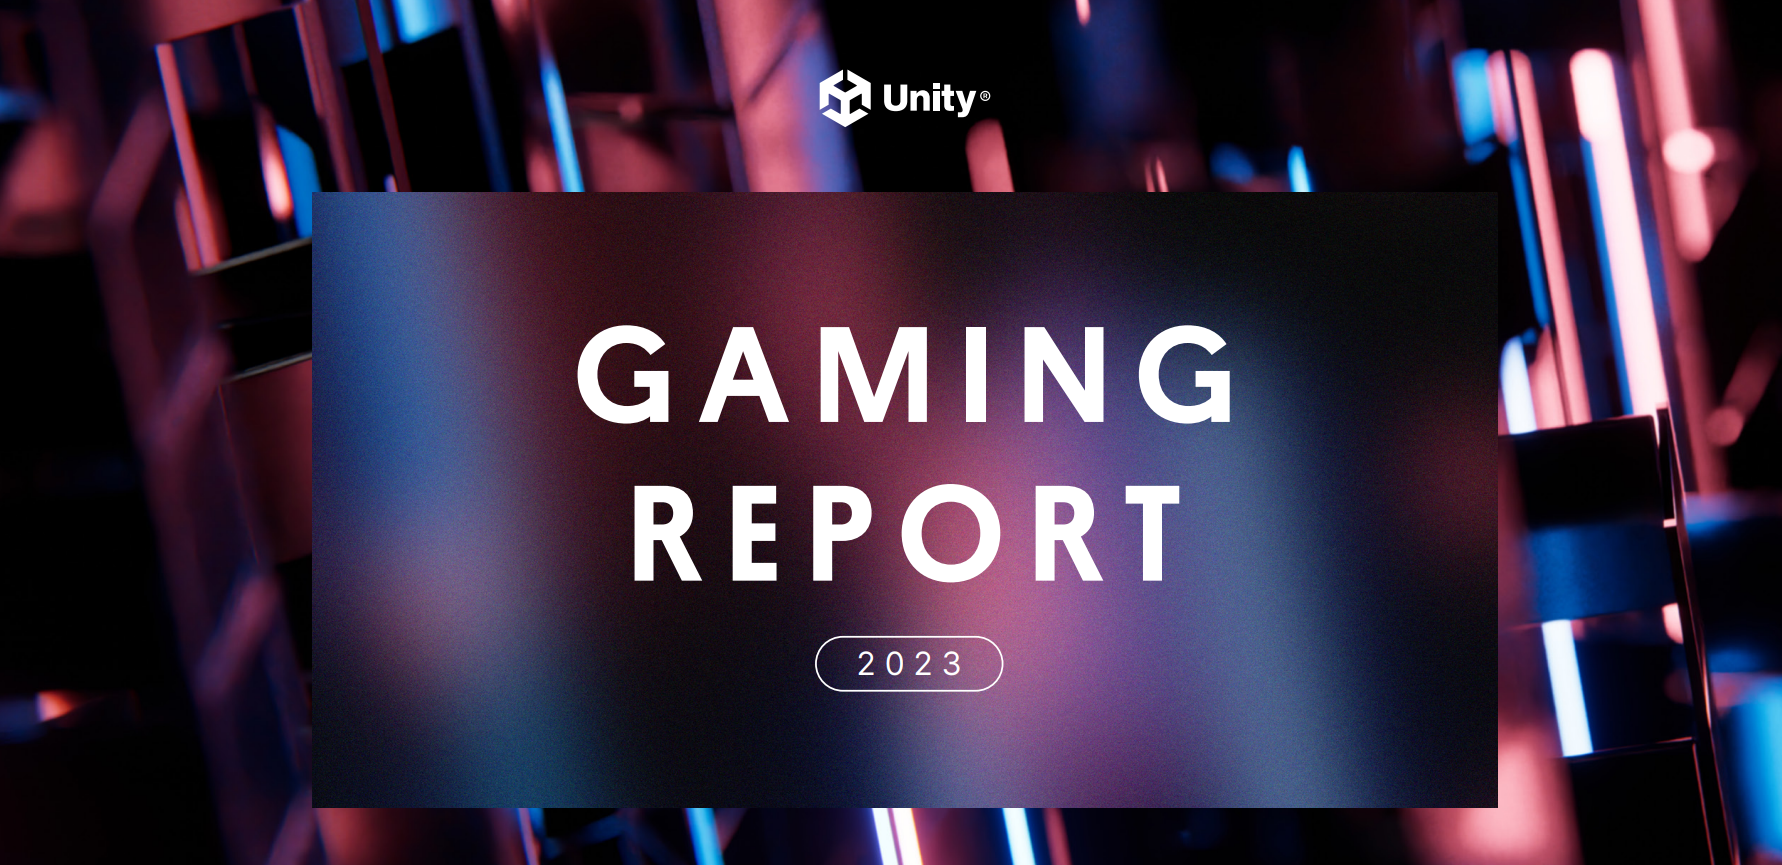 Unity Gaming Report 2023: mobile players on the rise